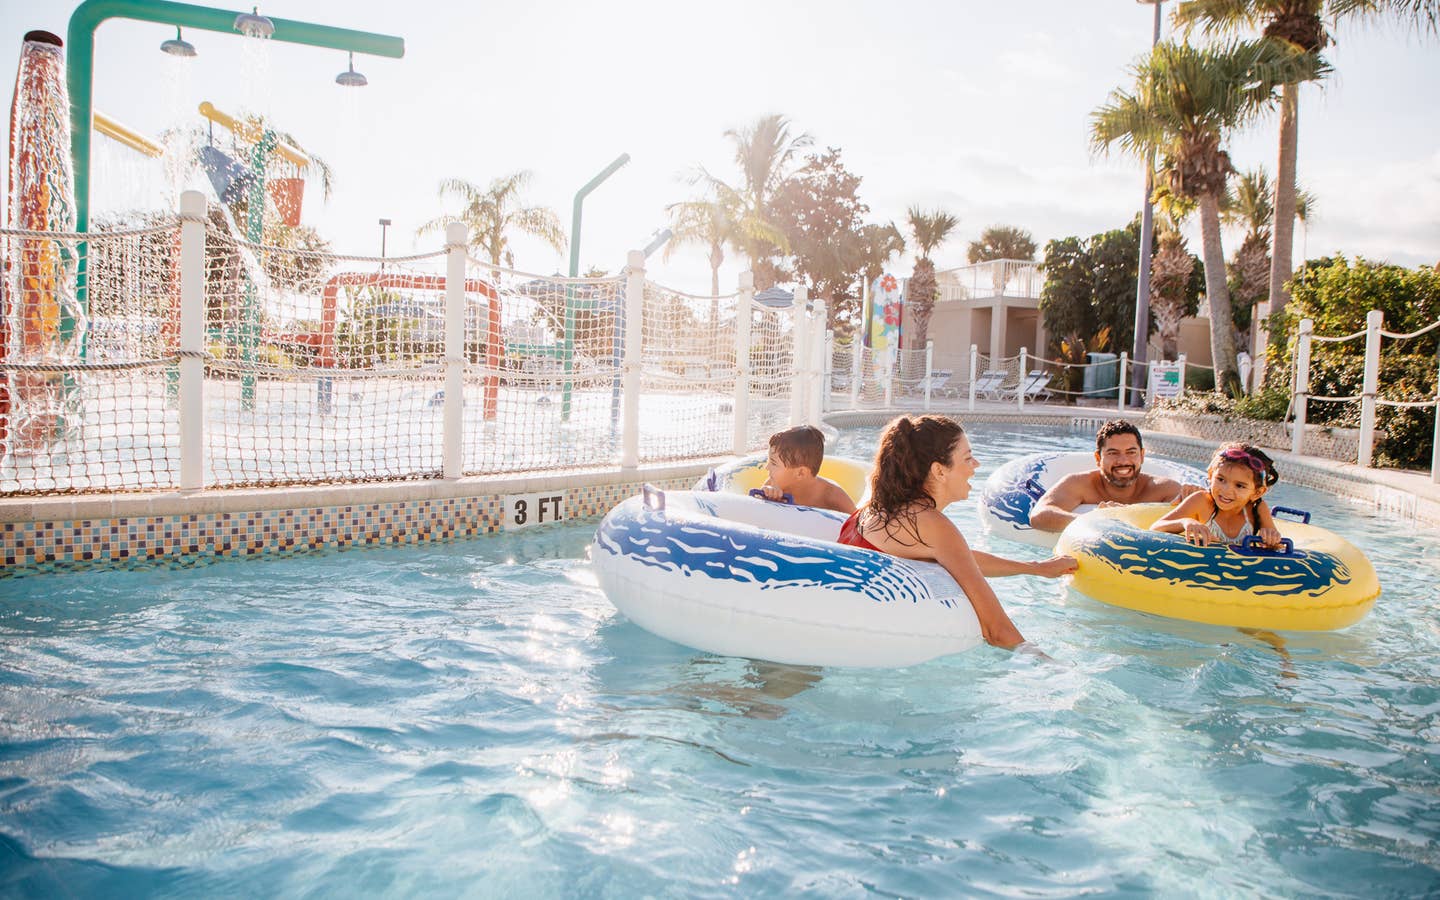 Family of four floating down lazy river at Cape Canaveral Beach Resort in Florida.